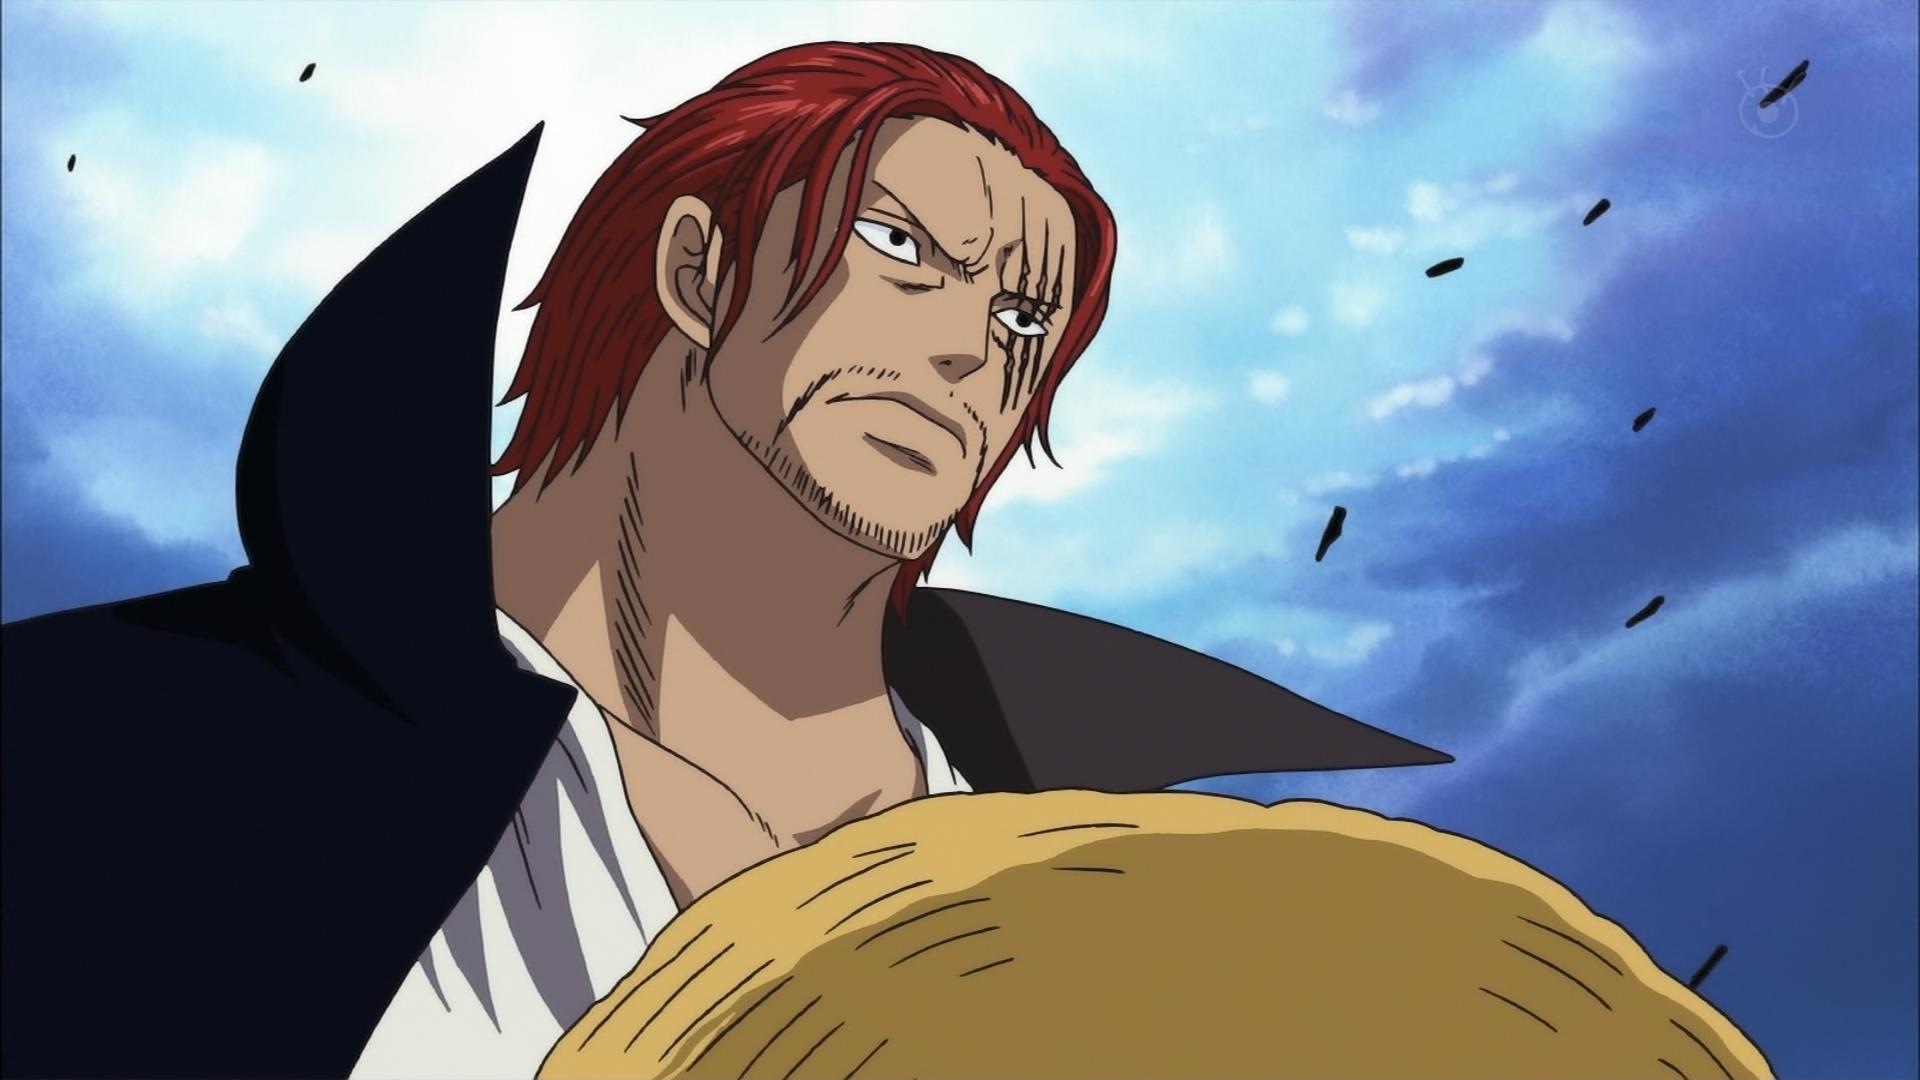 Yonko Shanks Has A Half Brother In One Piece?